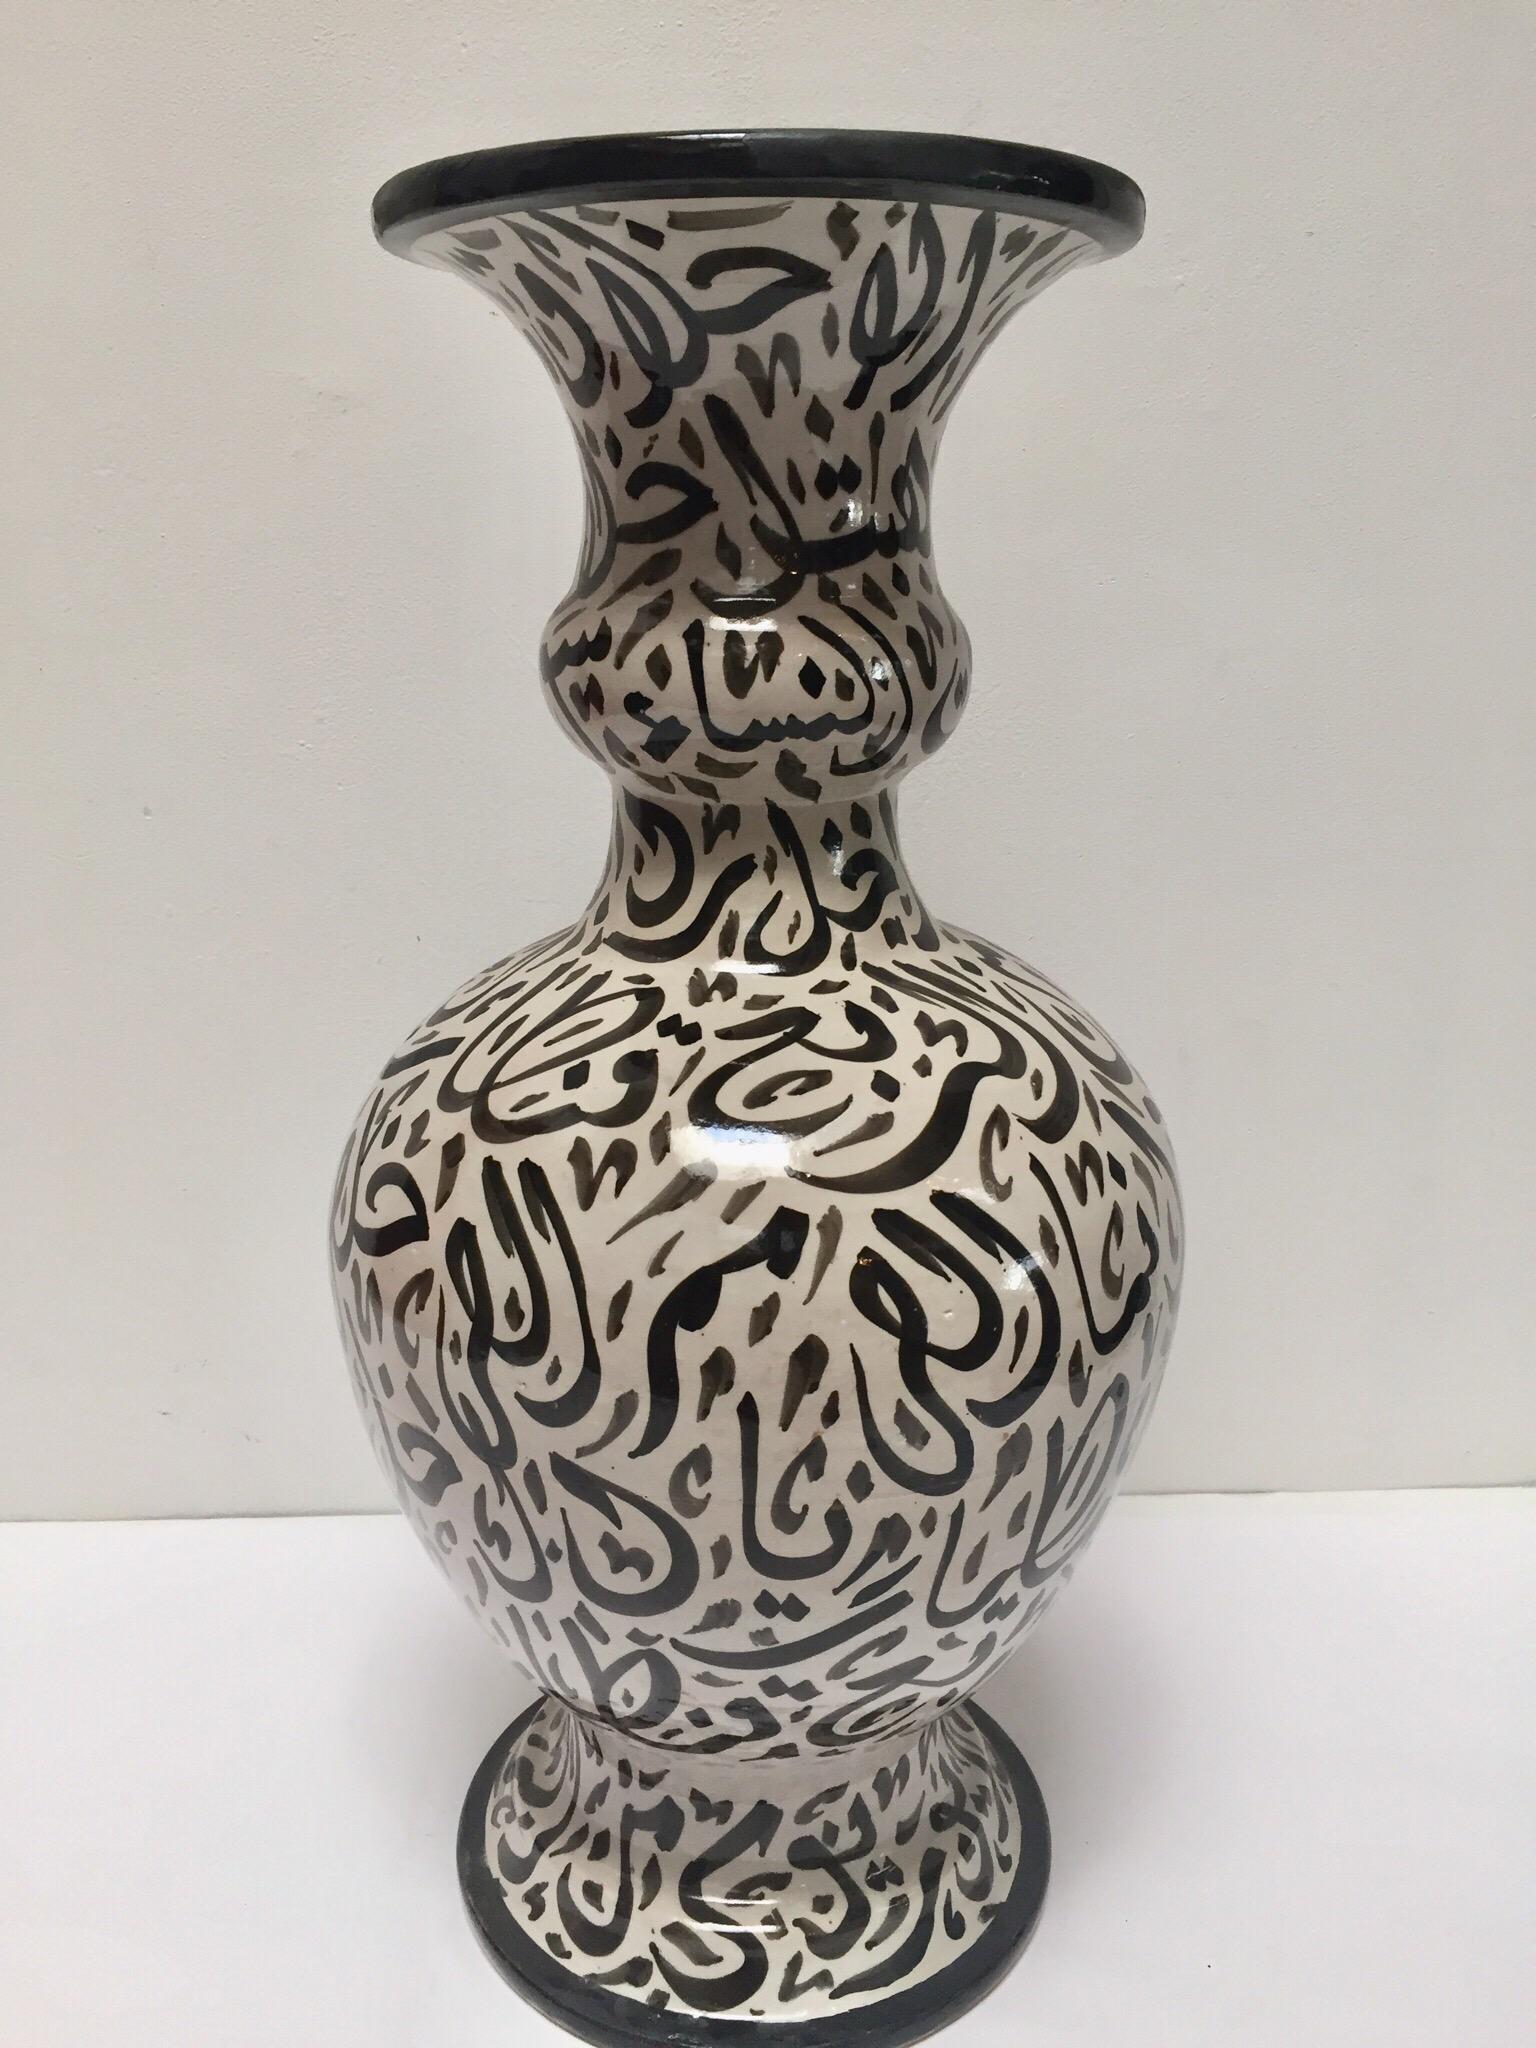 Large Moroccan glazed ceramic vase from Fez.
Moorish style ceramic handcrafted and hand painted with Arabic calligraphy writing.
This kind of Art Writing looks calligraphic is called Lettrism, it is a form of art that uses letters that are not